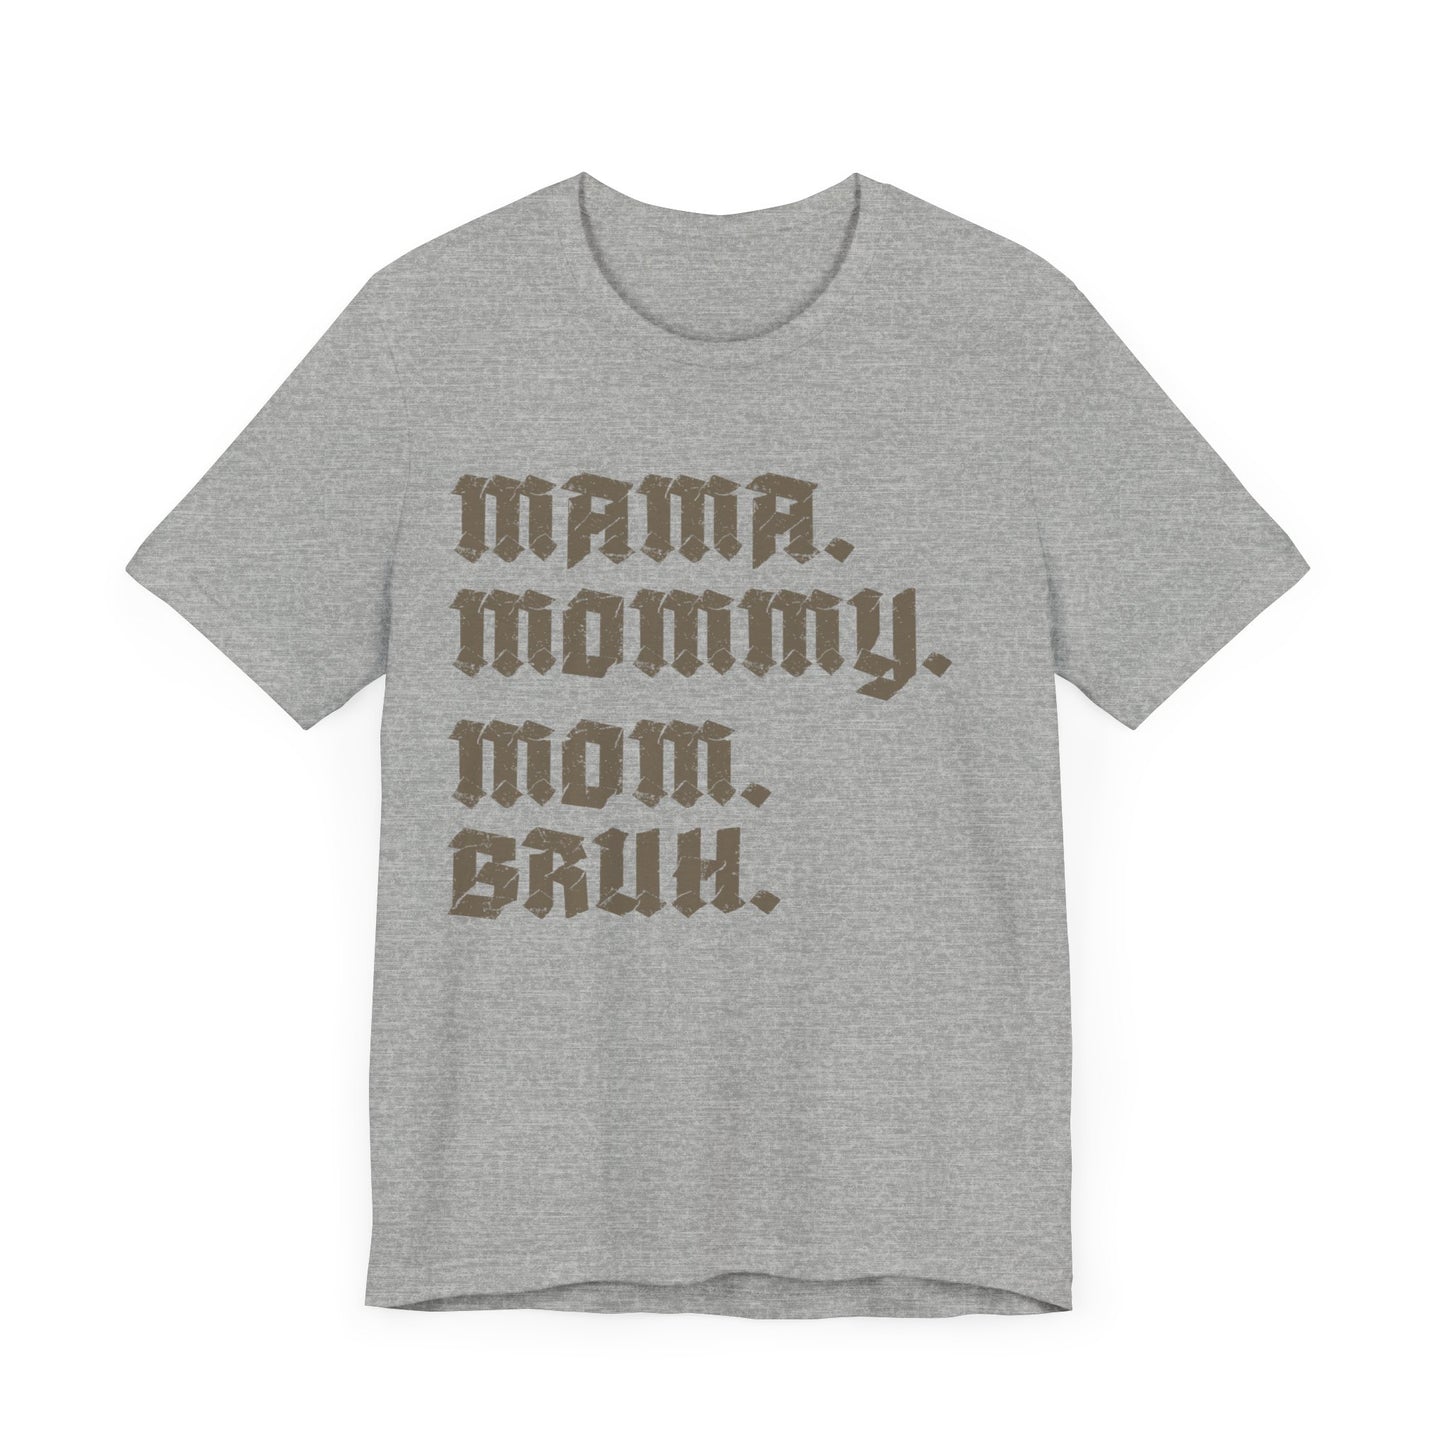 Mama Mommy Mom Bruh Shirt, Best Mother's Day Shirt, Funny Mom Shirt, Sarcastic Mom Shirt, Sarcastic Mama Shirt, Funny Bruh Shirt, T1593